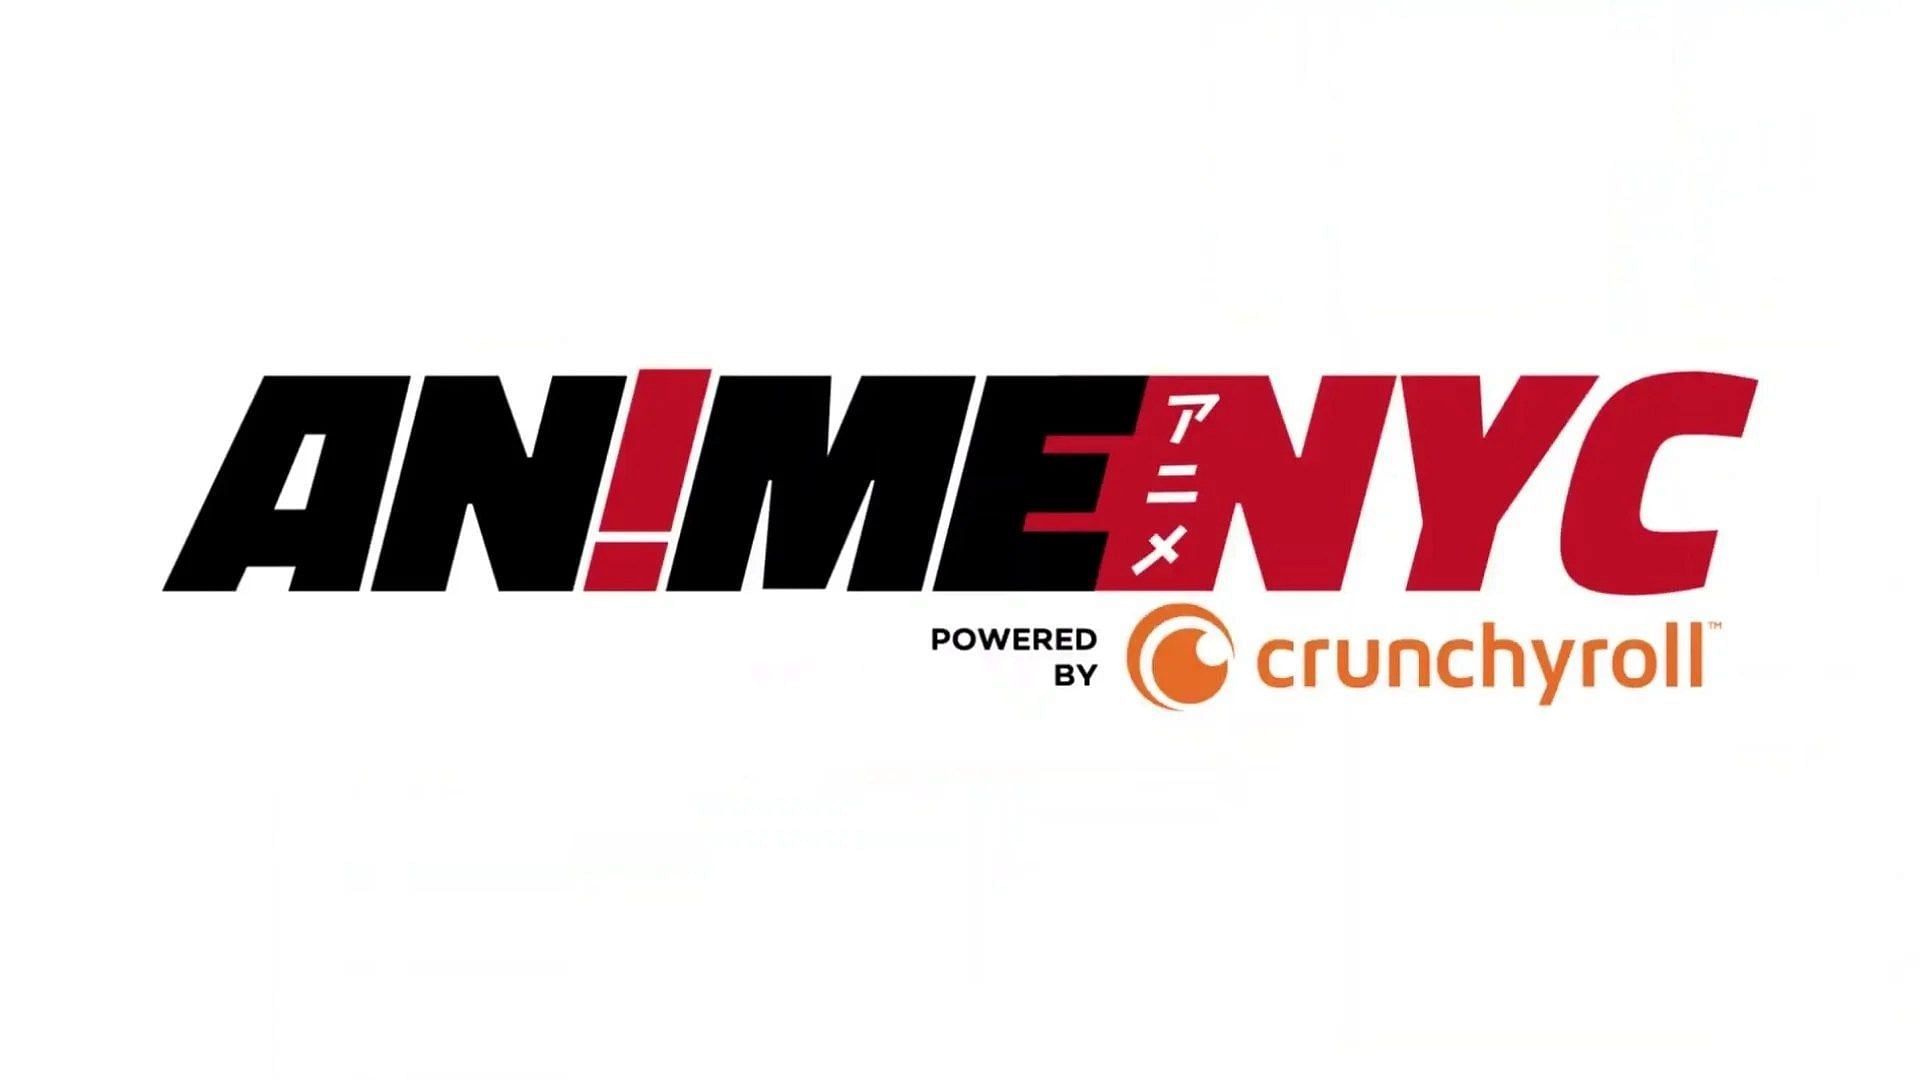 Crunchyroll Announces New 2023 Anime Series Line-Up at Anime NYC